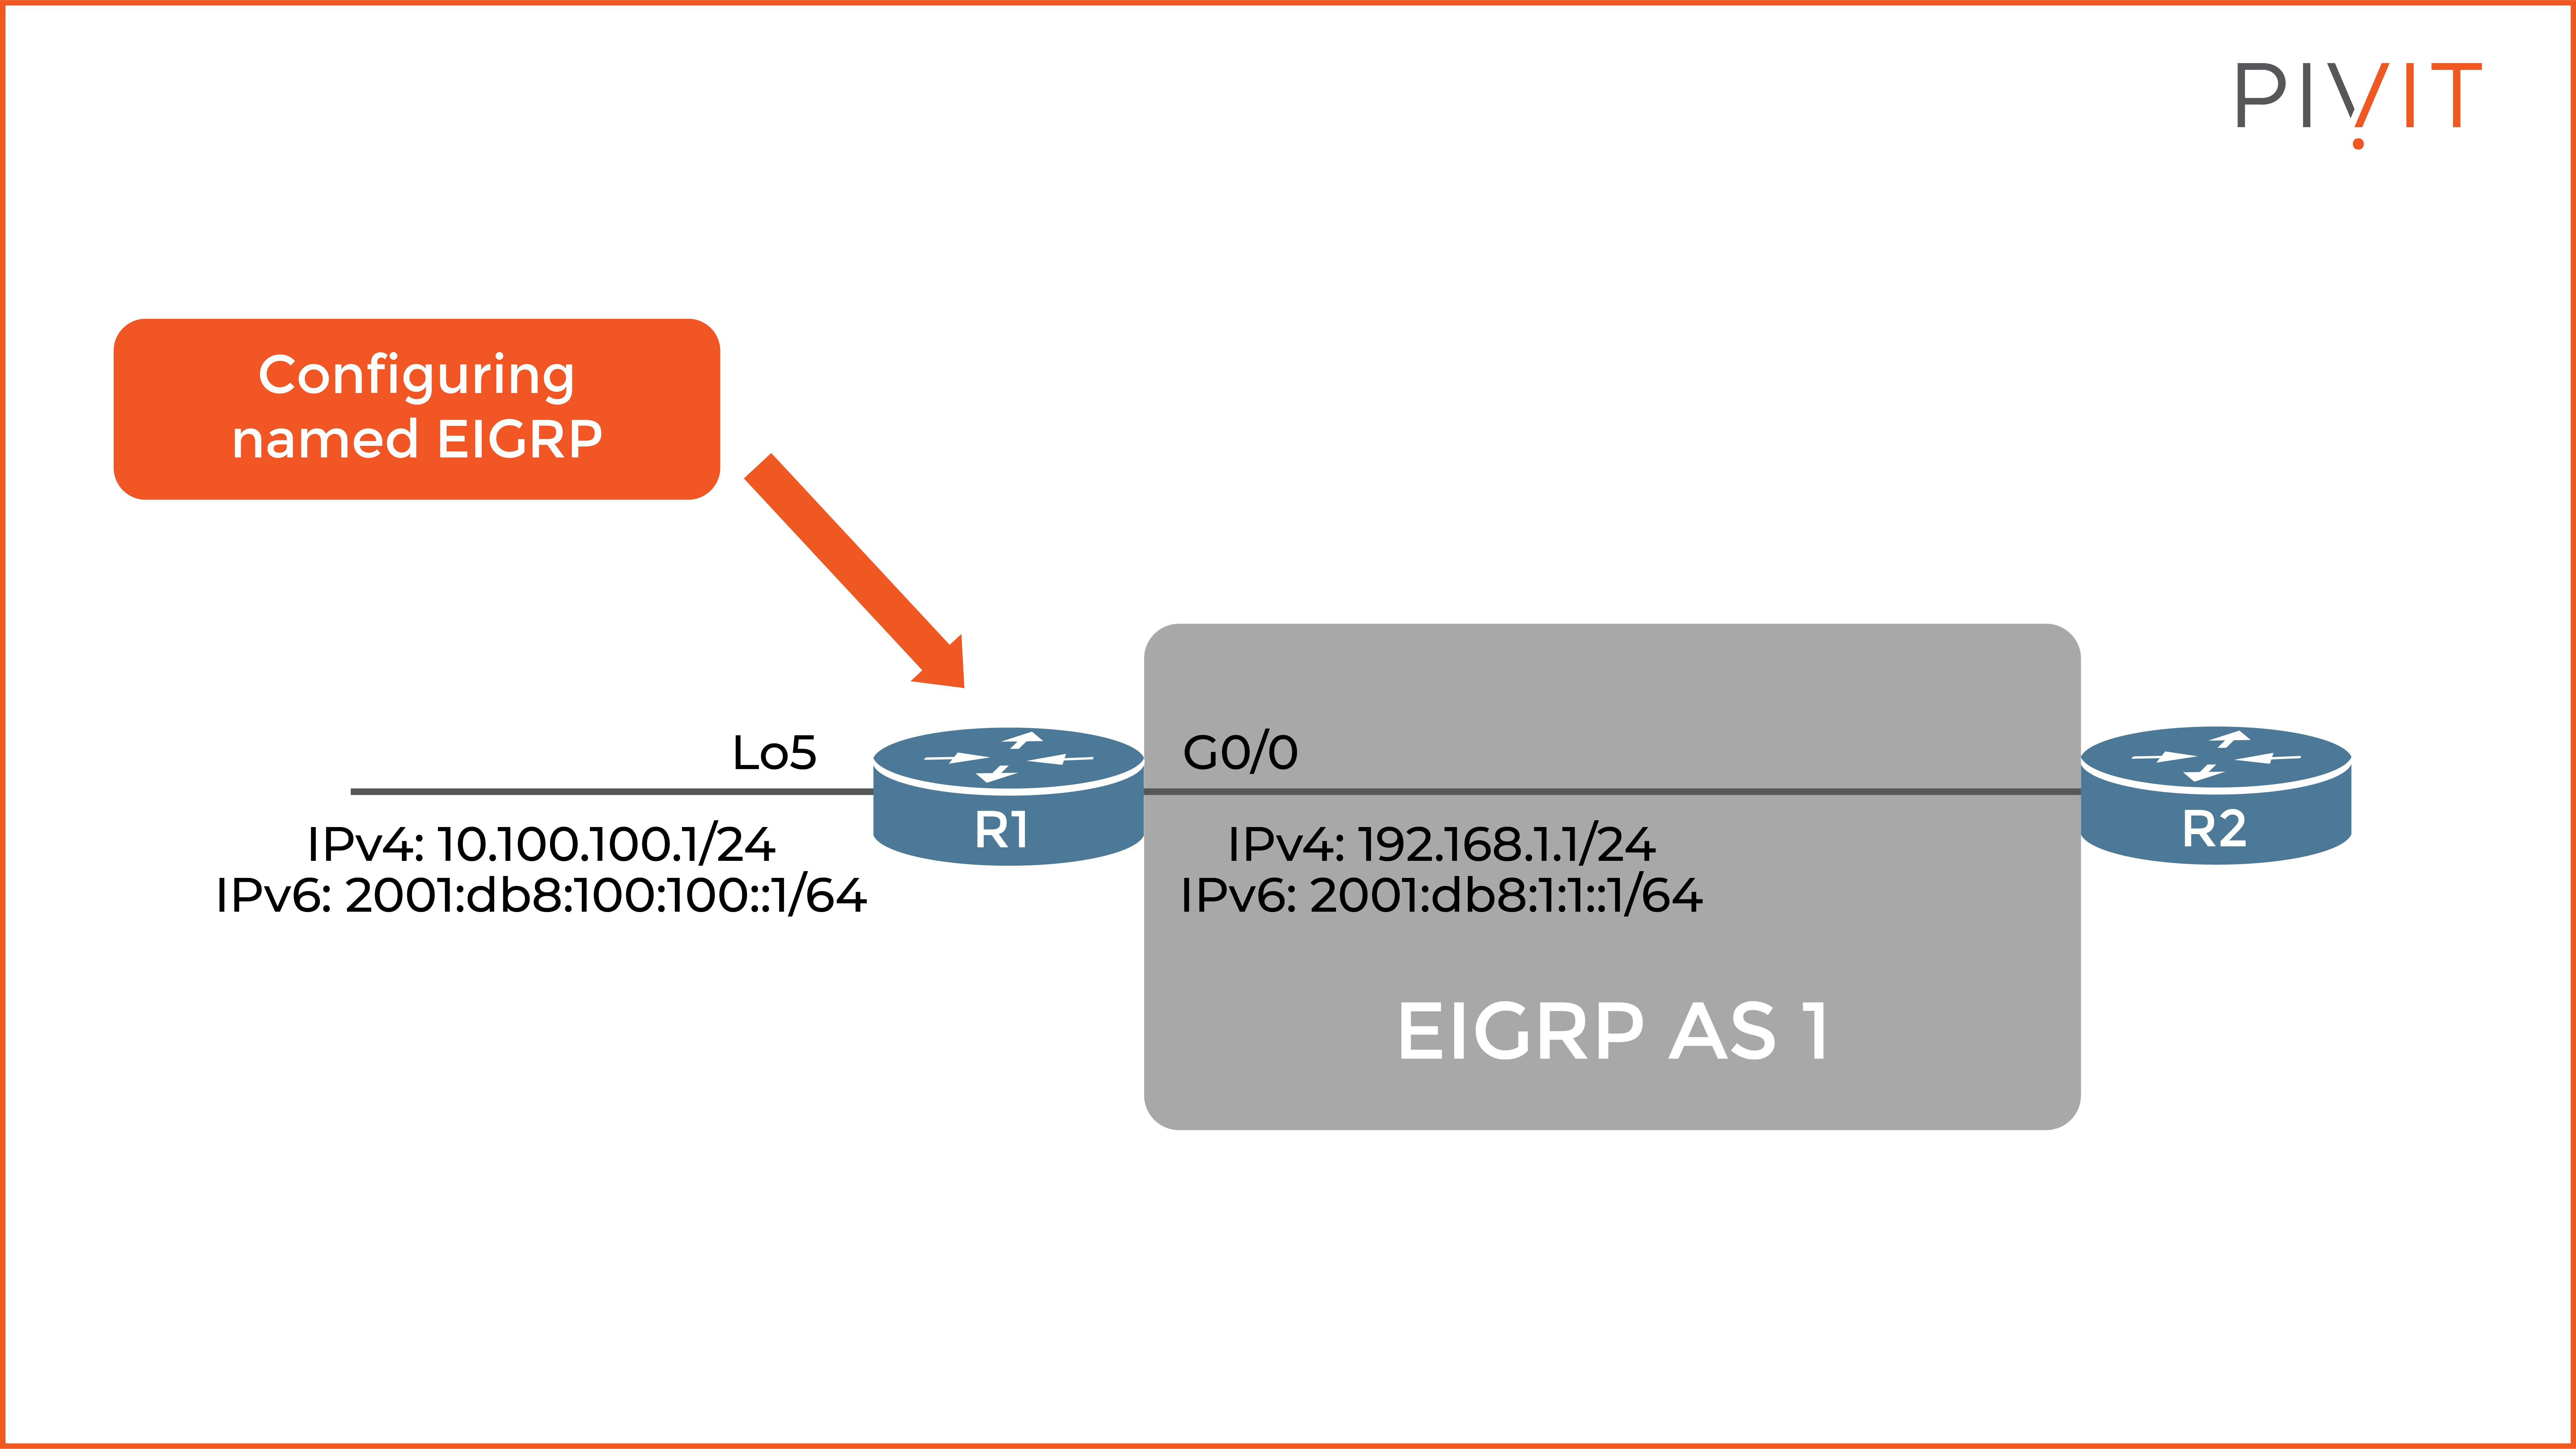 Configuring named EIGRP on router R1 to establish IPv4 and IPv6 EIGRP adjacency with R2